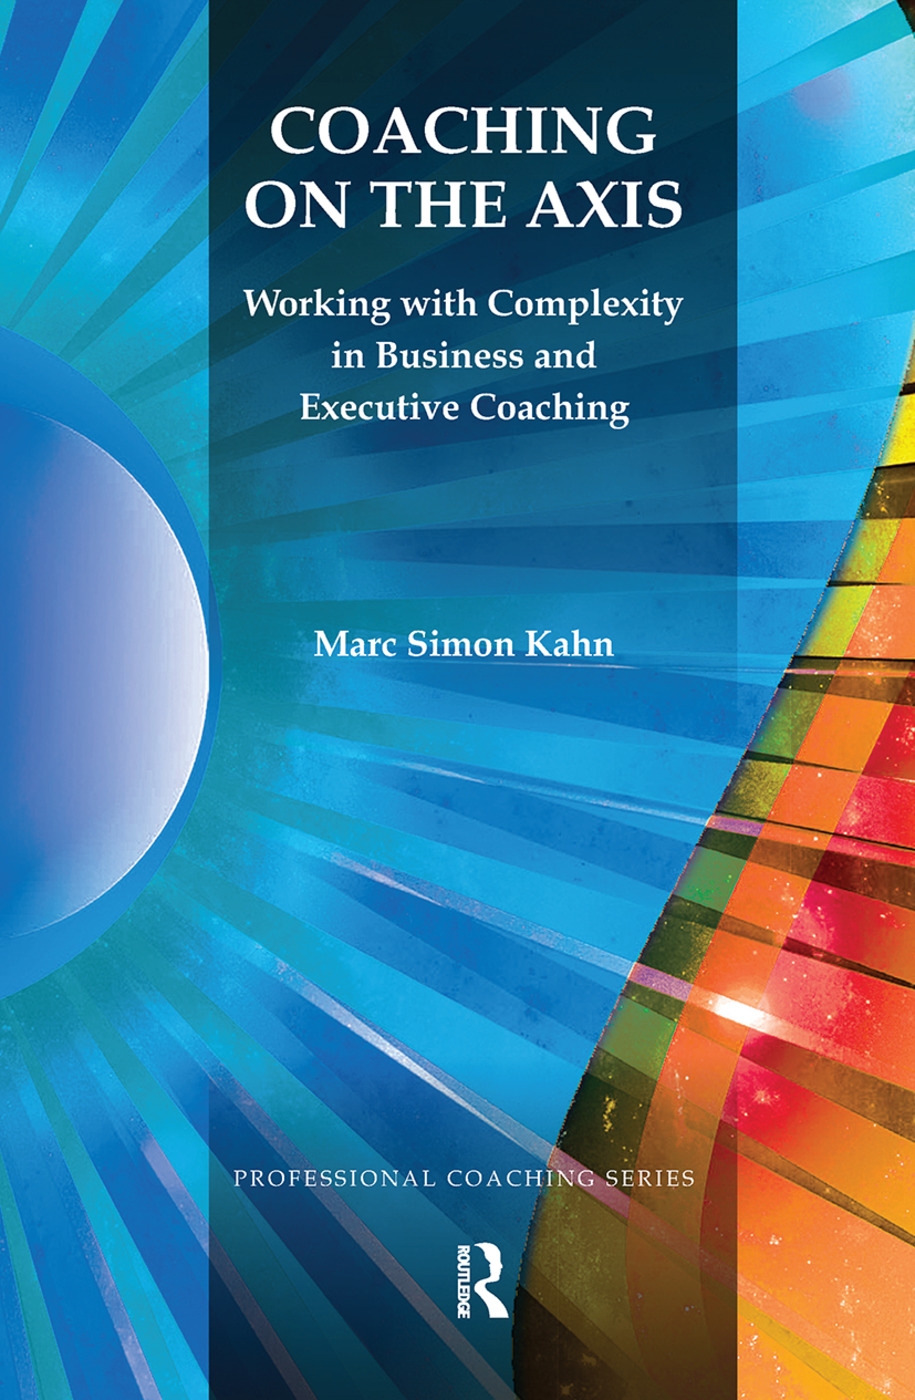 Coaching on the Axis: Working with Complexity in Business and Executive Coaching